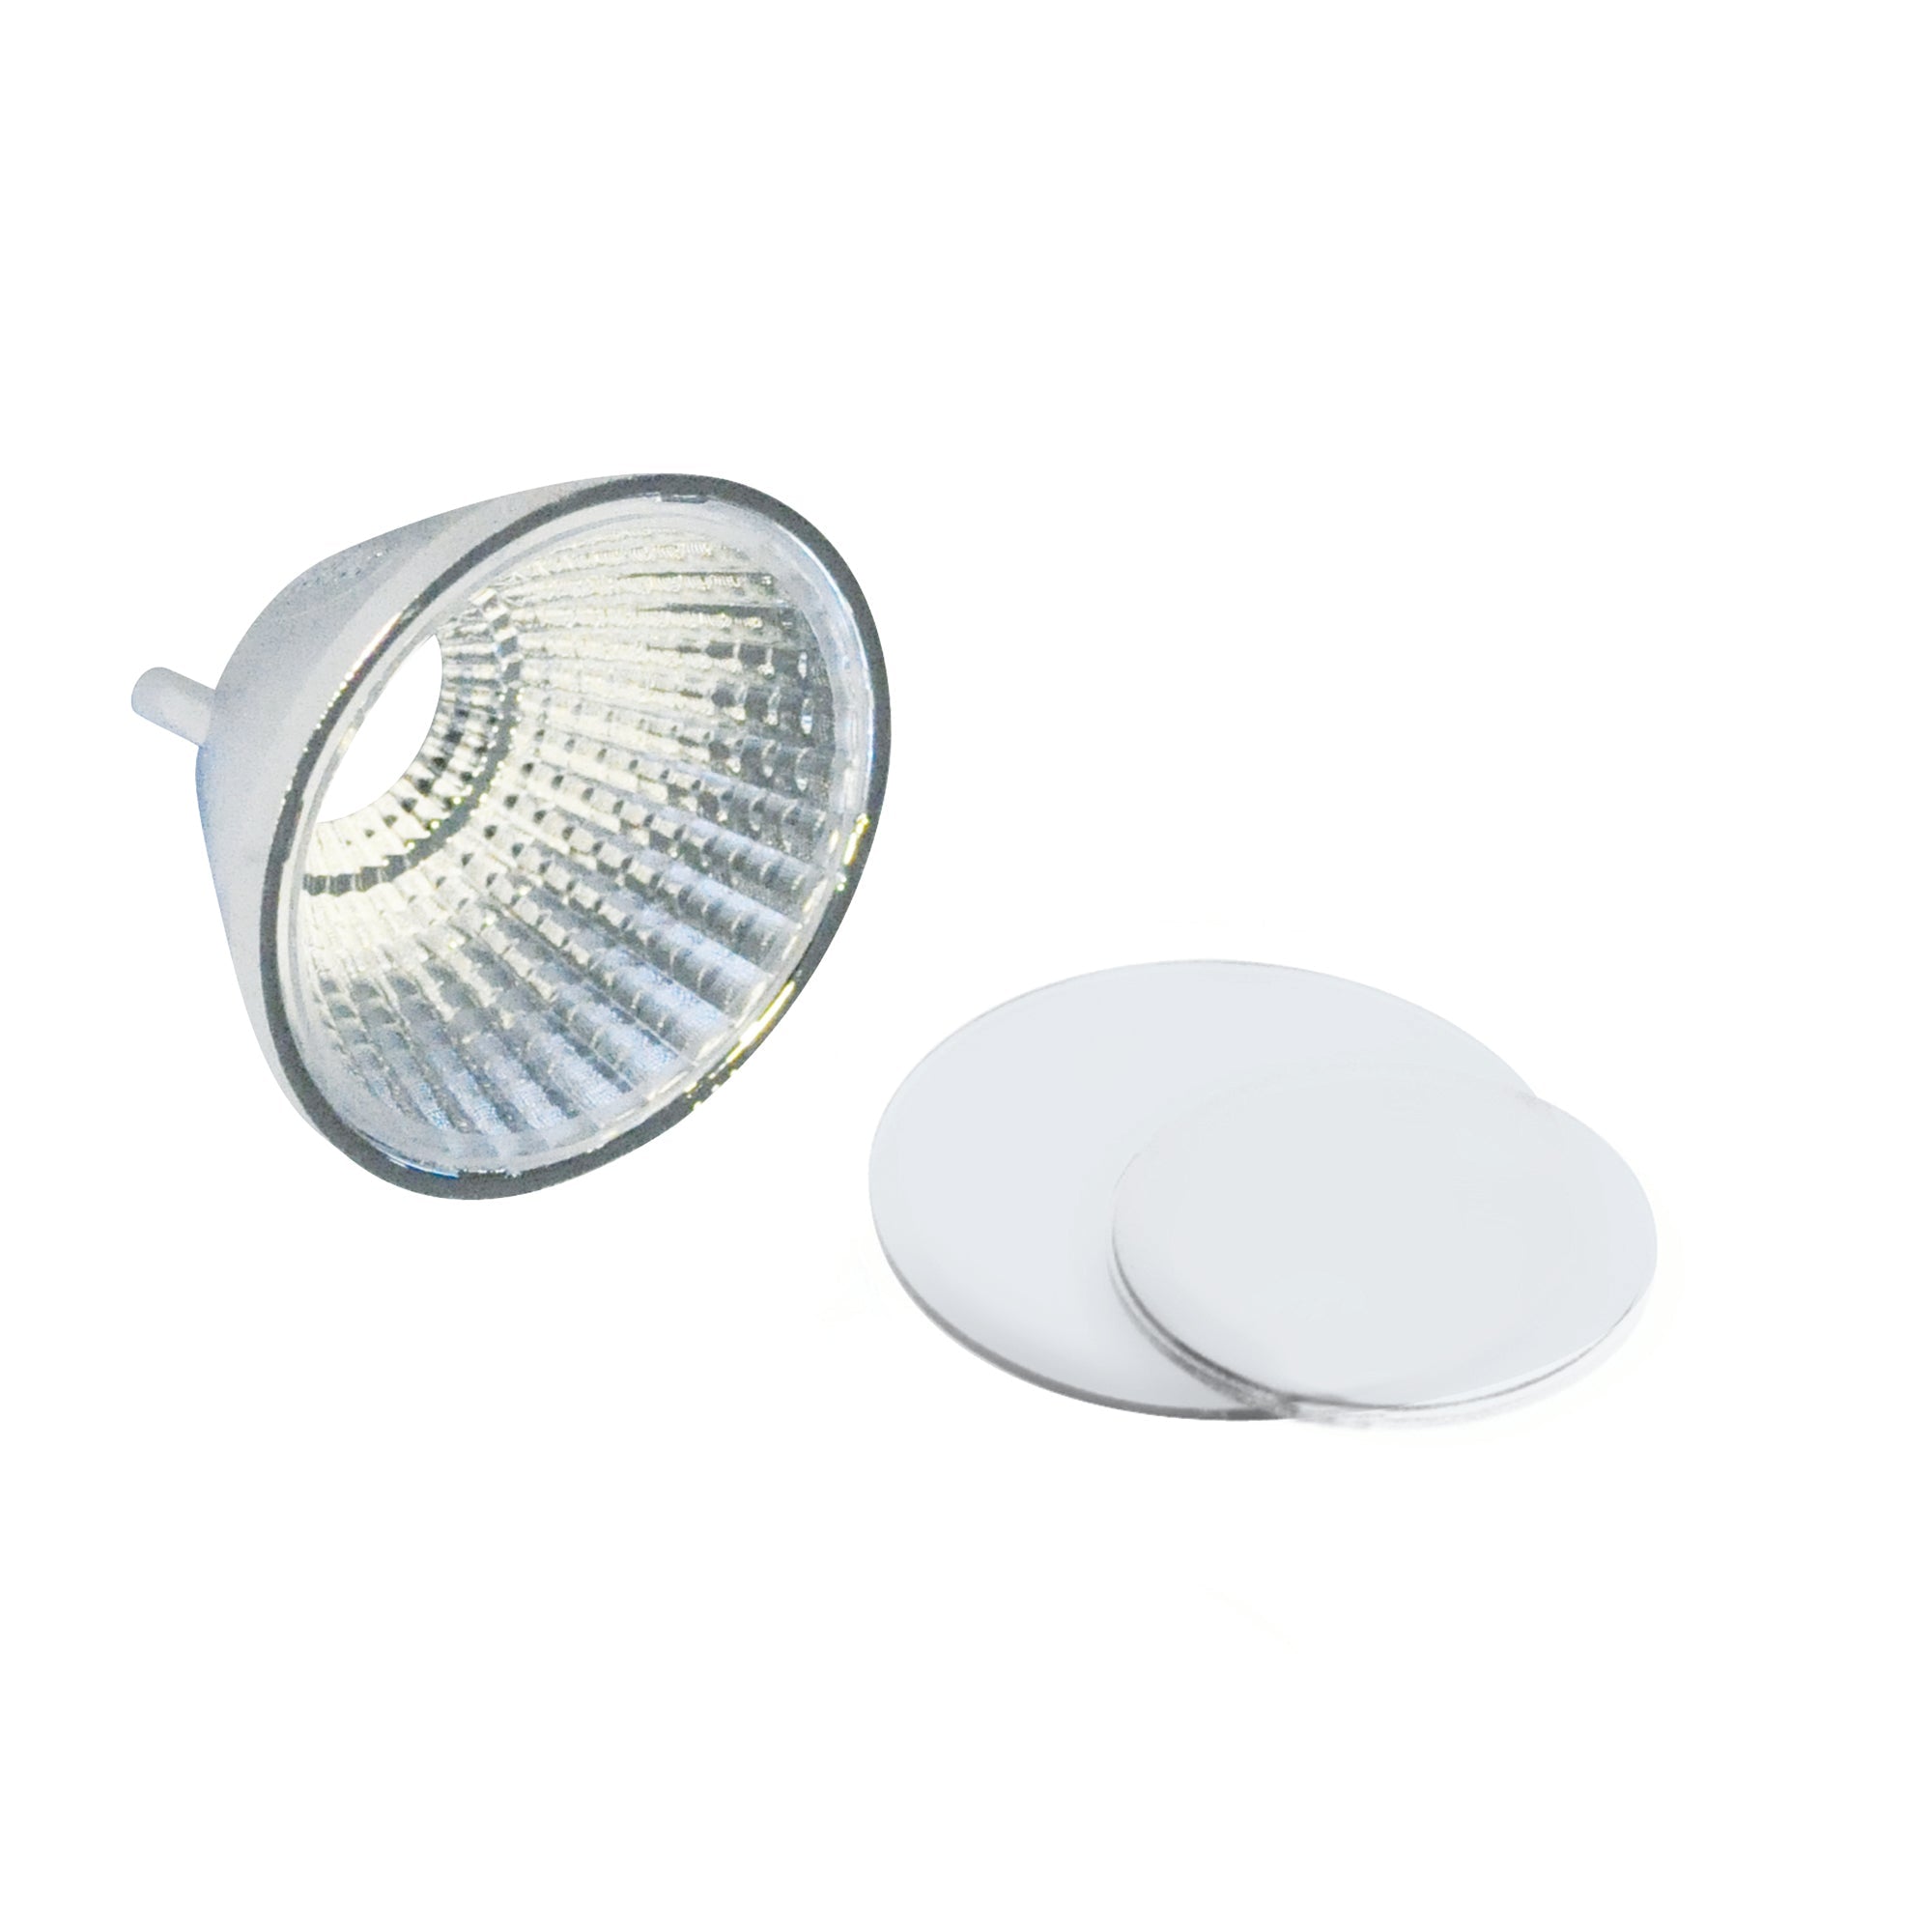 Nora Lighting NIO-1REFL60FR - Recessed - Replacement 60-Degree Frosted Optic for 1 Inch Iolite Trims